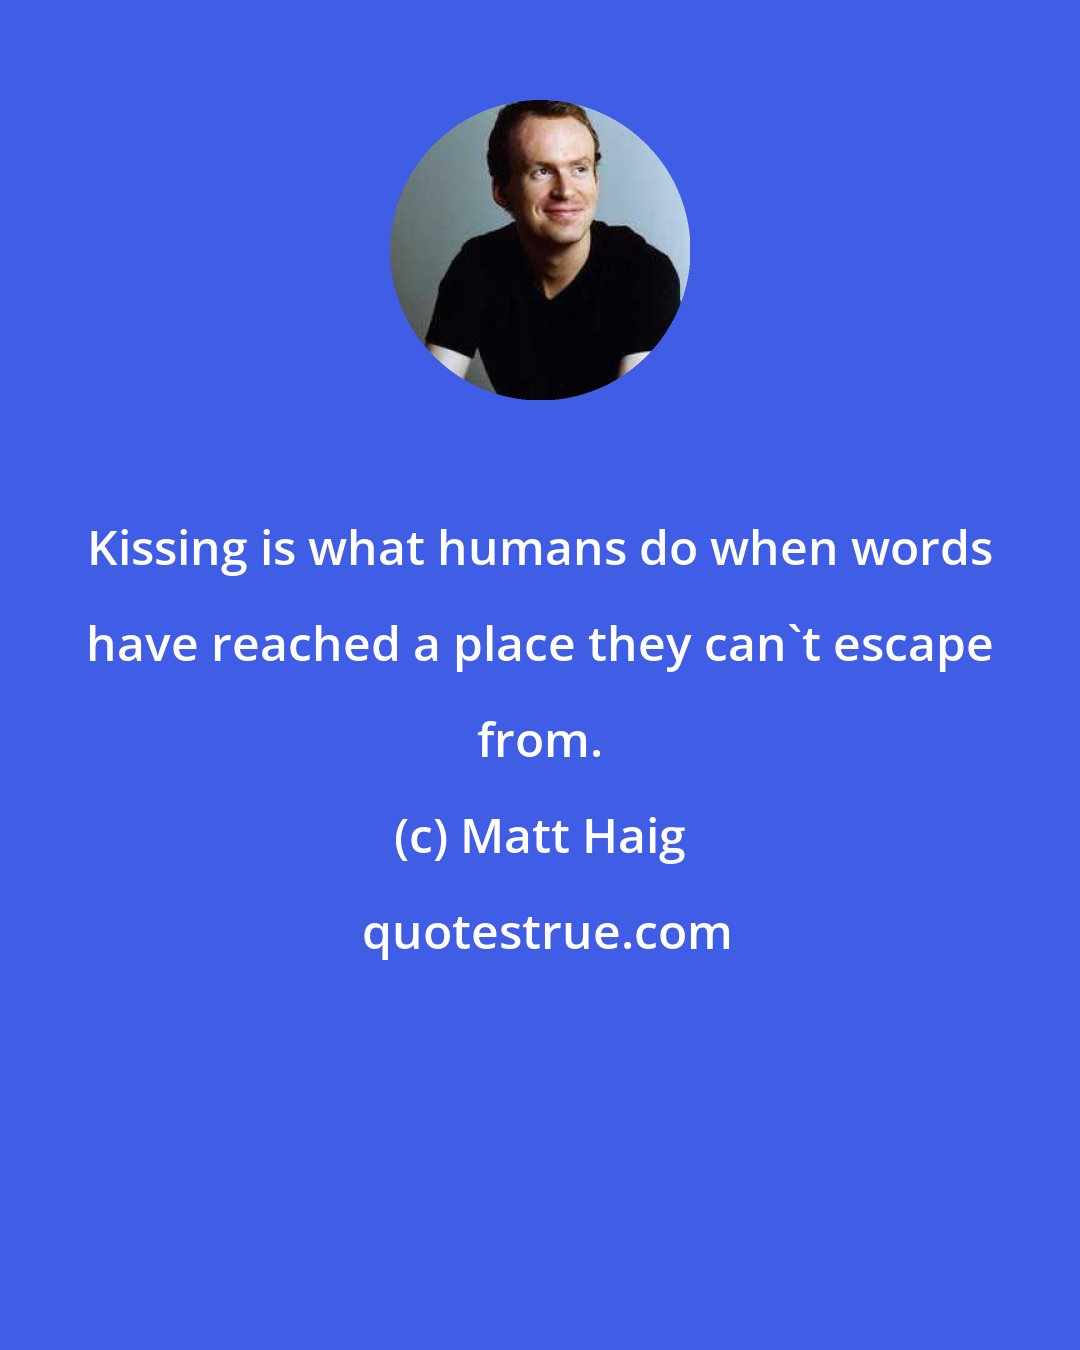 Matt Haig: Kissing is what humans do when words have reached a place they can't escape from.